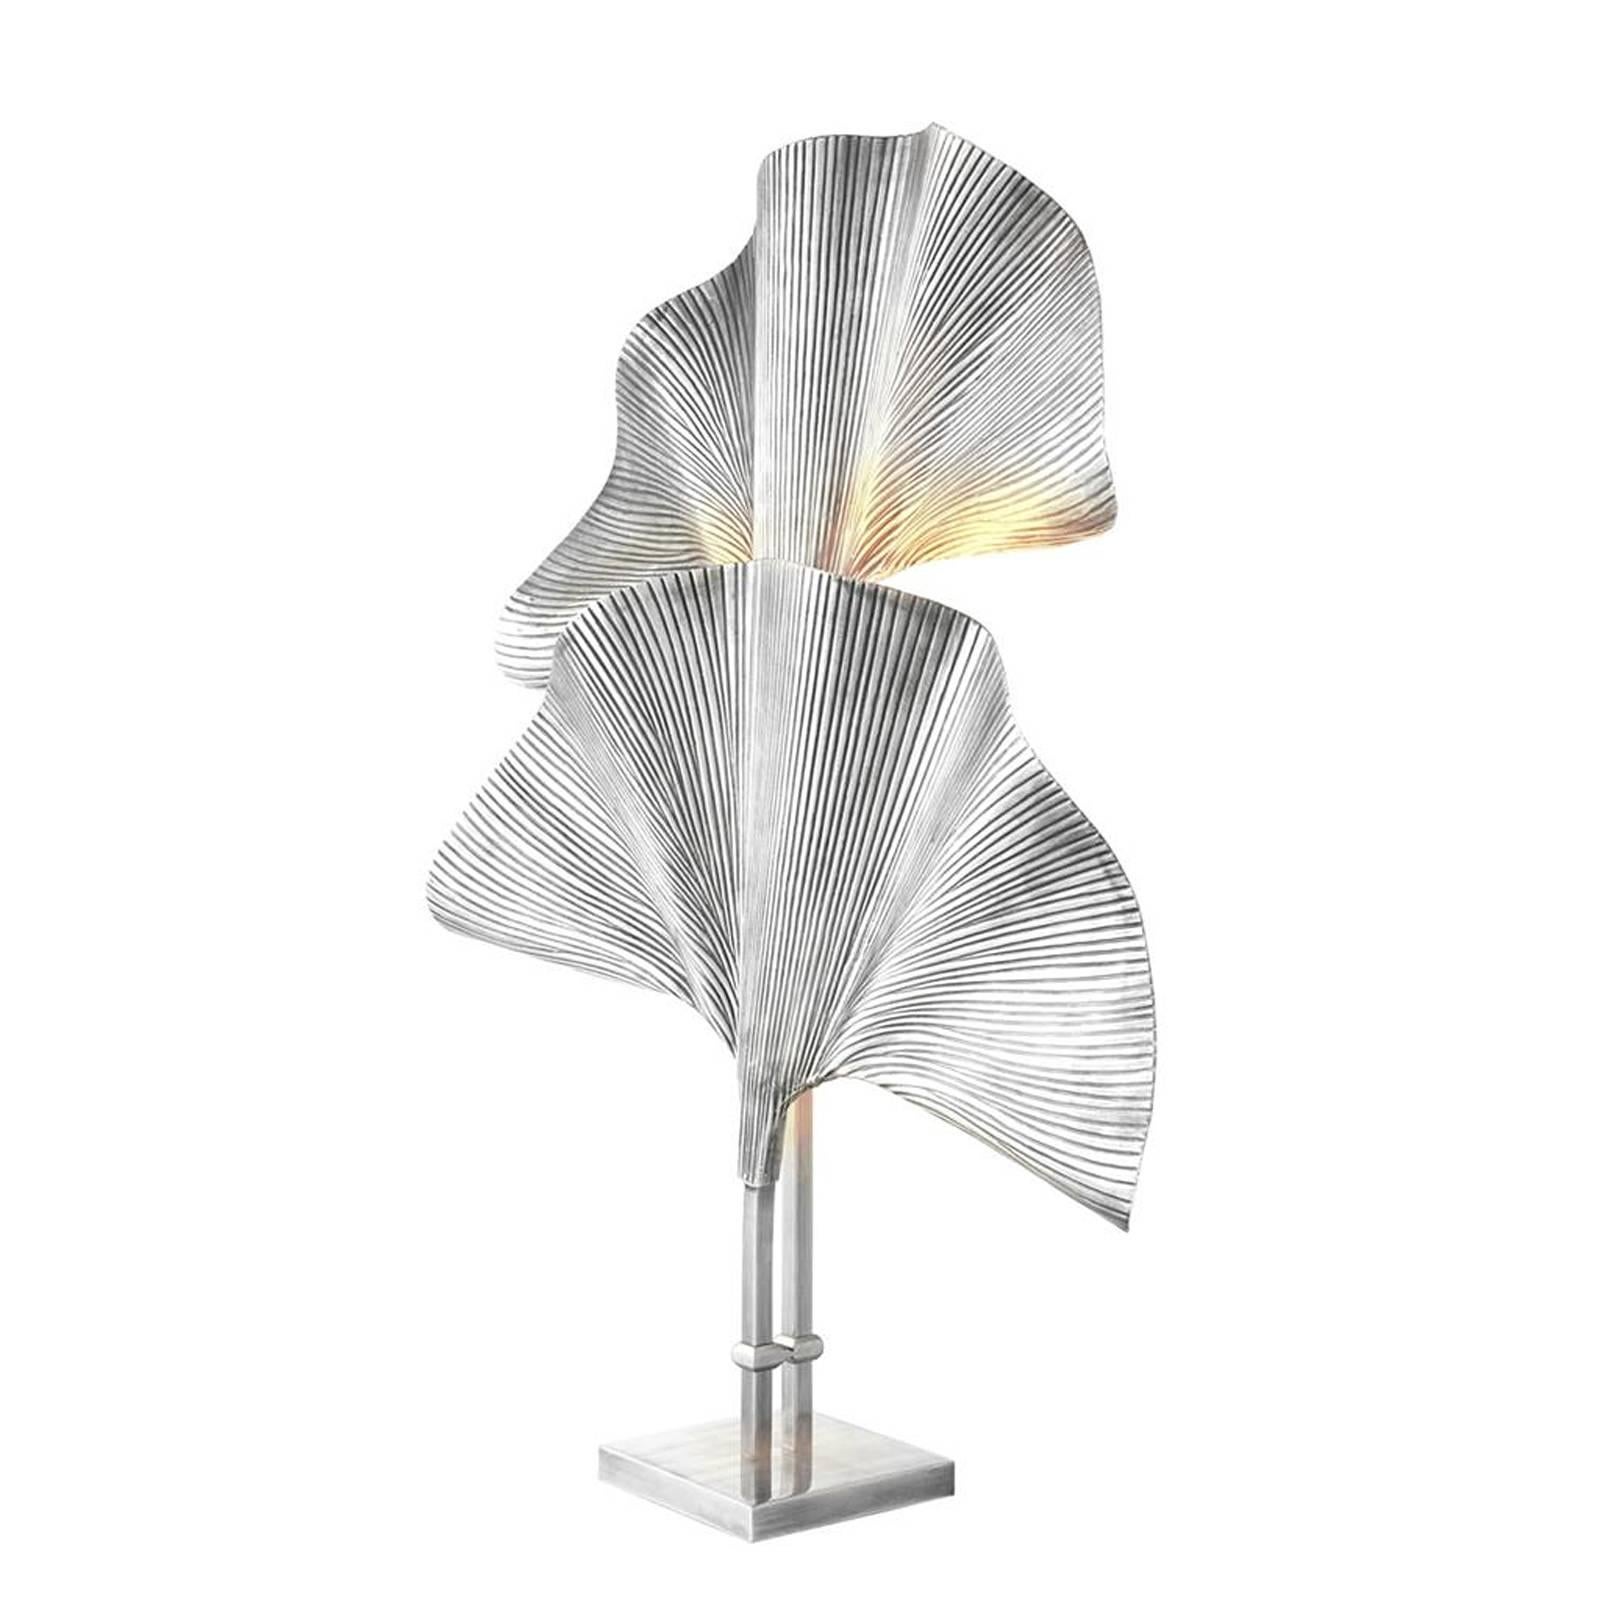 Table lamp Ginko Biloba with structure in tarnished 
silver plated finish. Two bulbs lamp holder type E27, 
40 Watt, 220-240 Volt.
Also available in floor lamp and table
Lamp. Also available in polished brass finish.
